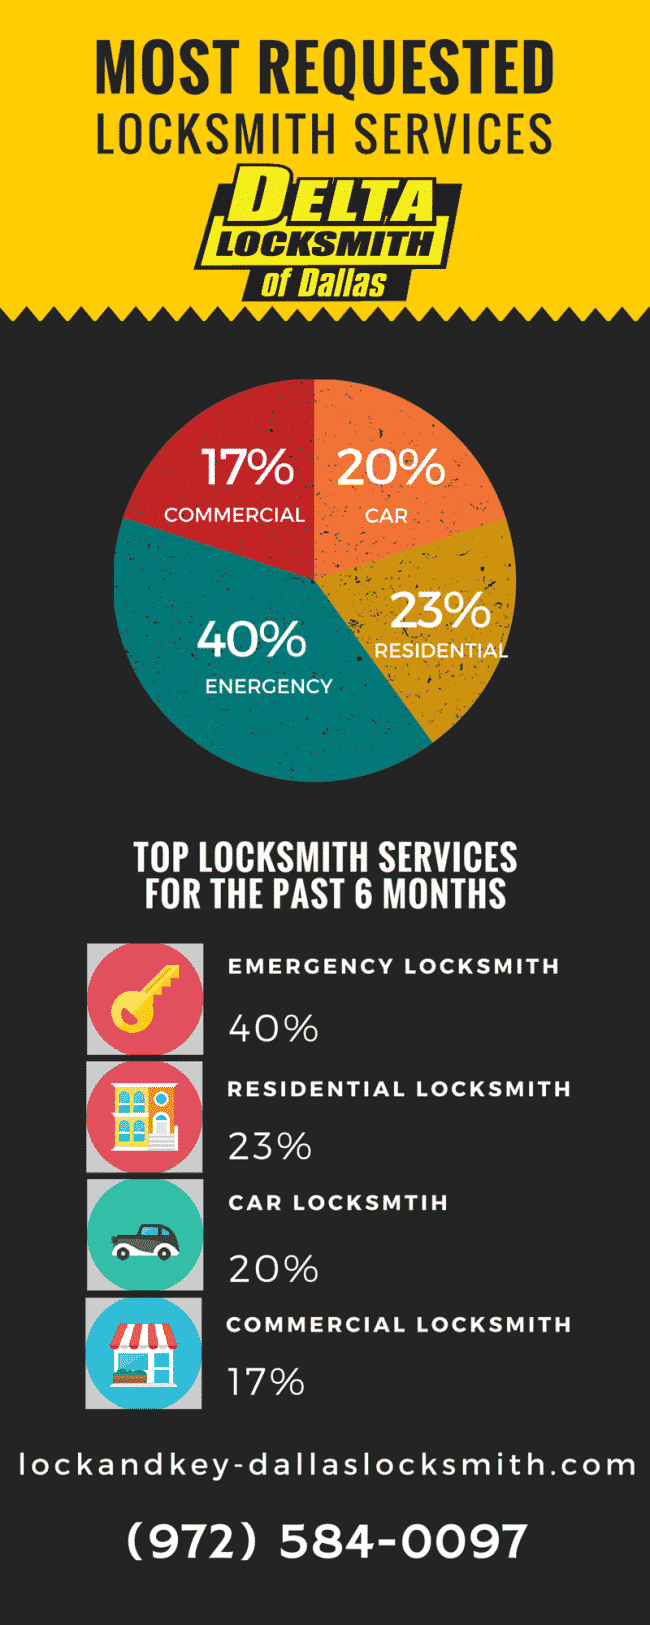 Most requested locksmith services in Dallas and Fort Worth